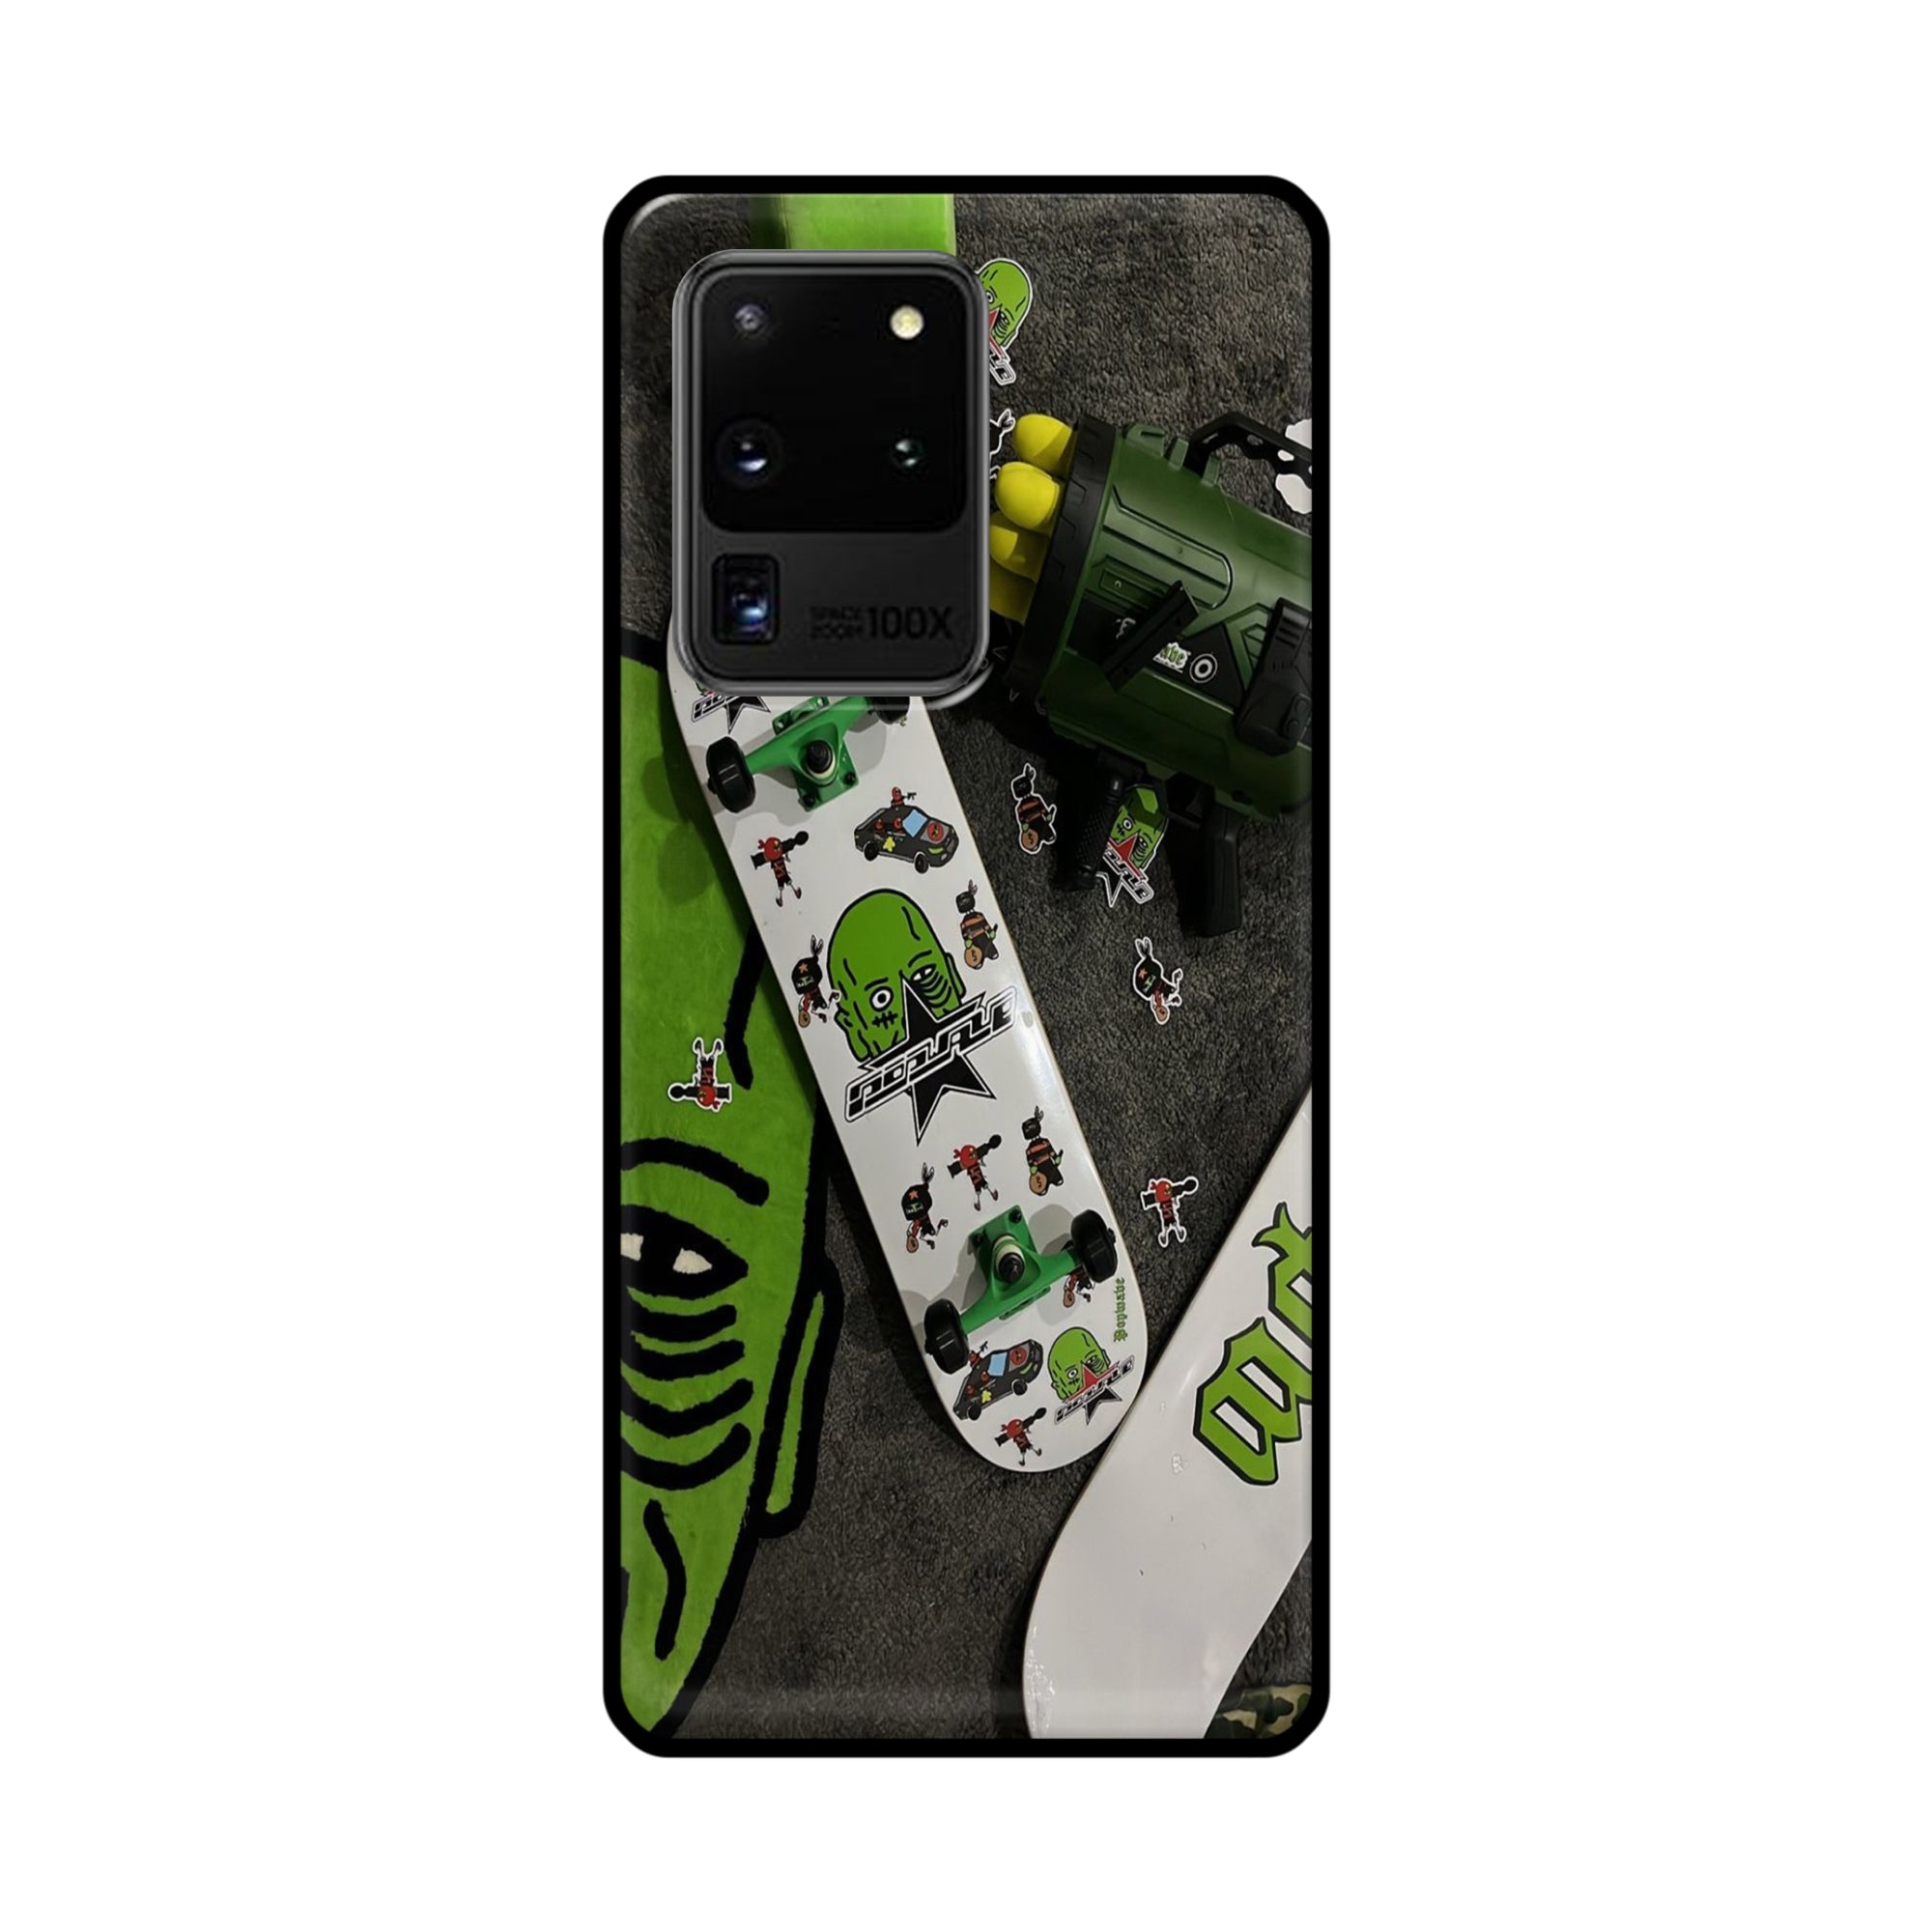 Buy Hulk Skateboard Metal-Silicon Back Mobile Phone Case/Cover For Samsung Galaxy S20 Ultra Online